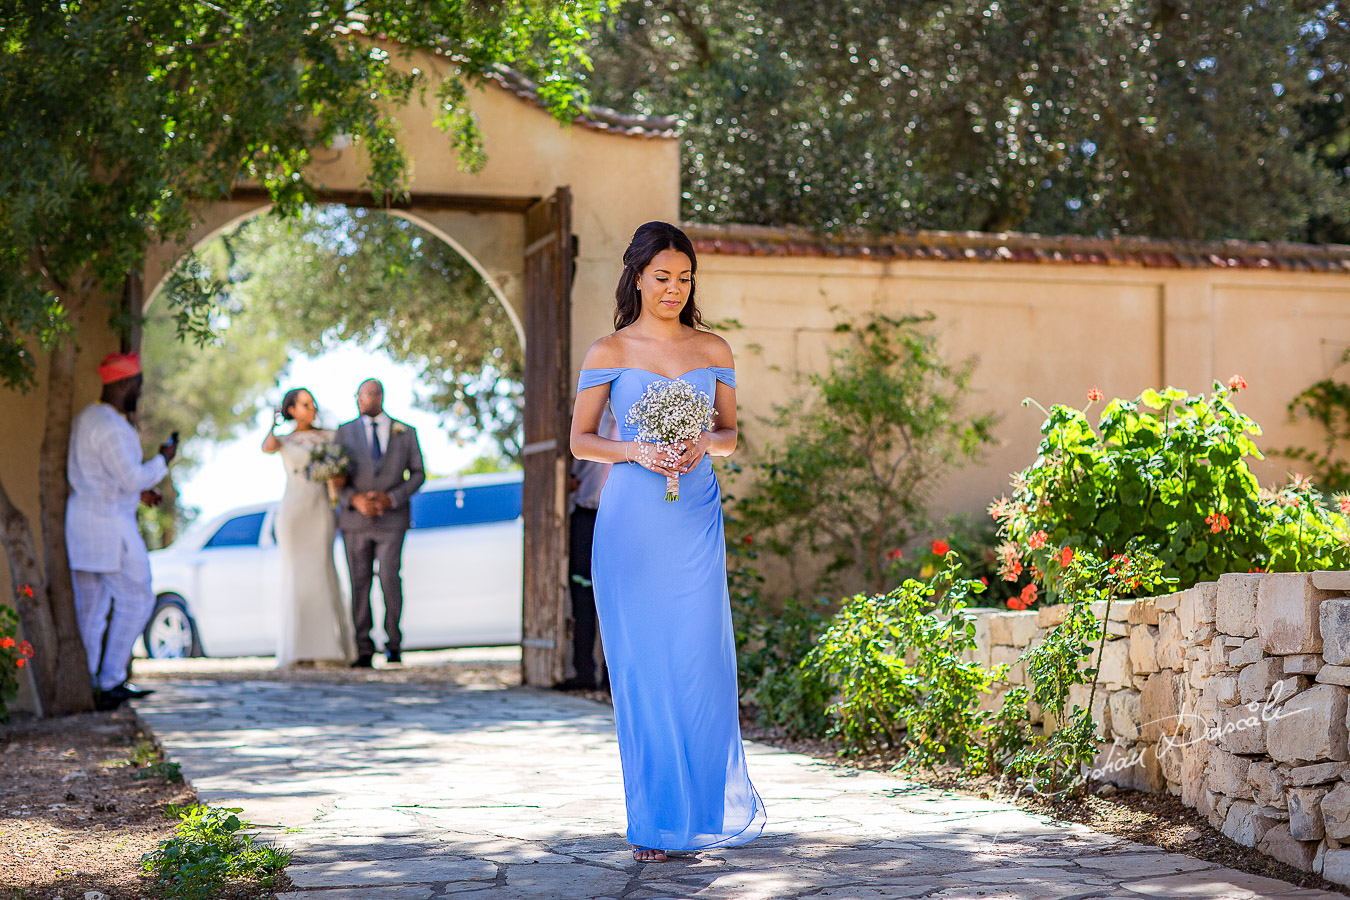 Moments with the maid of honor captured a wedding at Minthis Hills in Cyprus, by Cristian Dascalu.